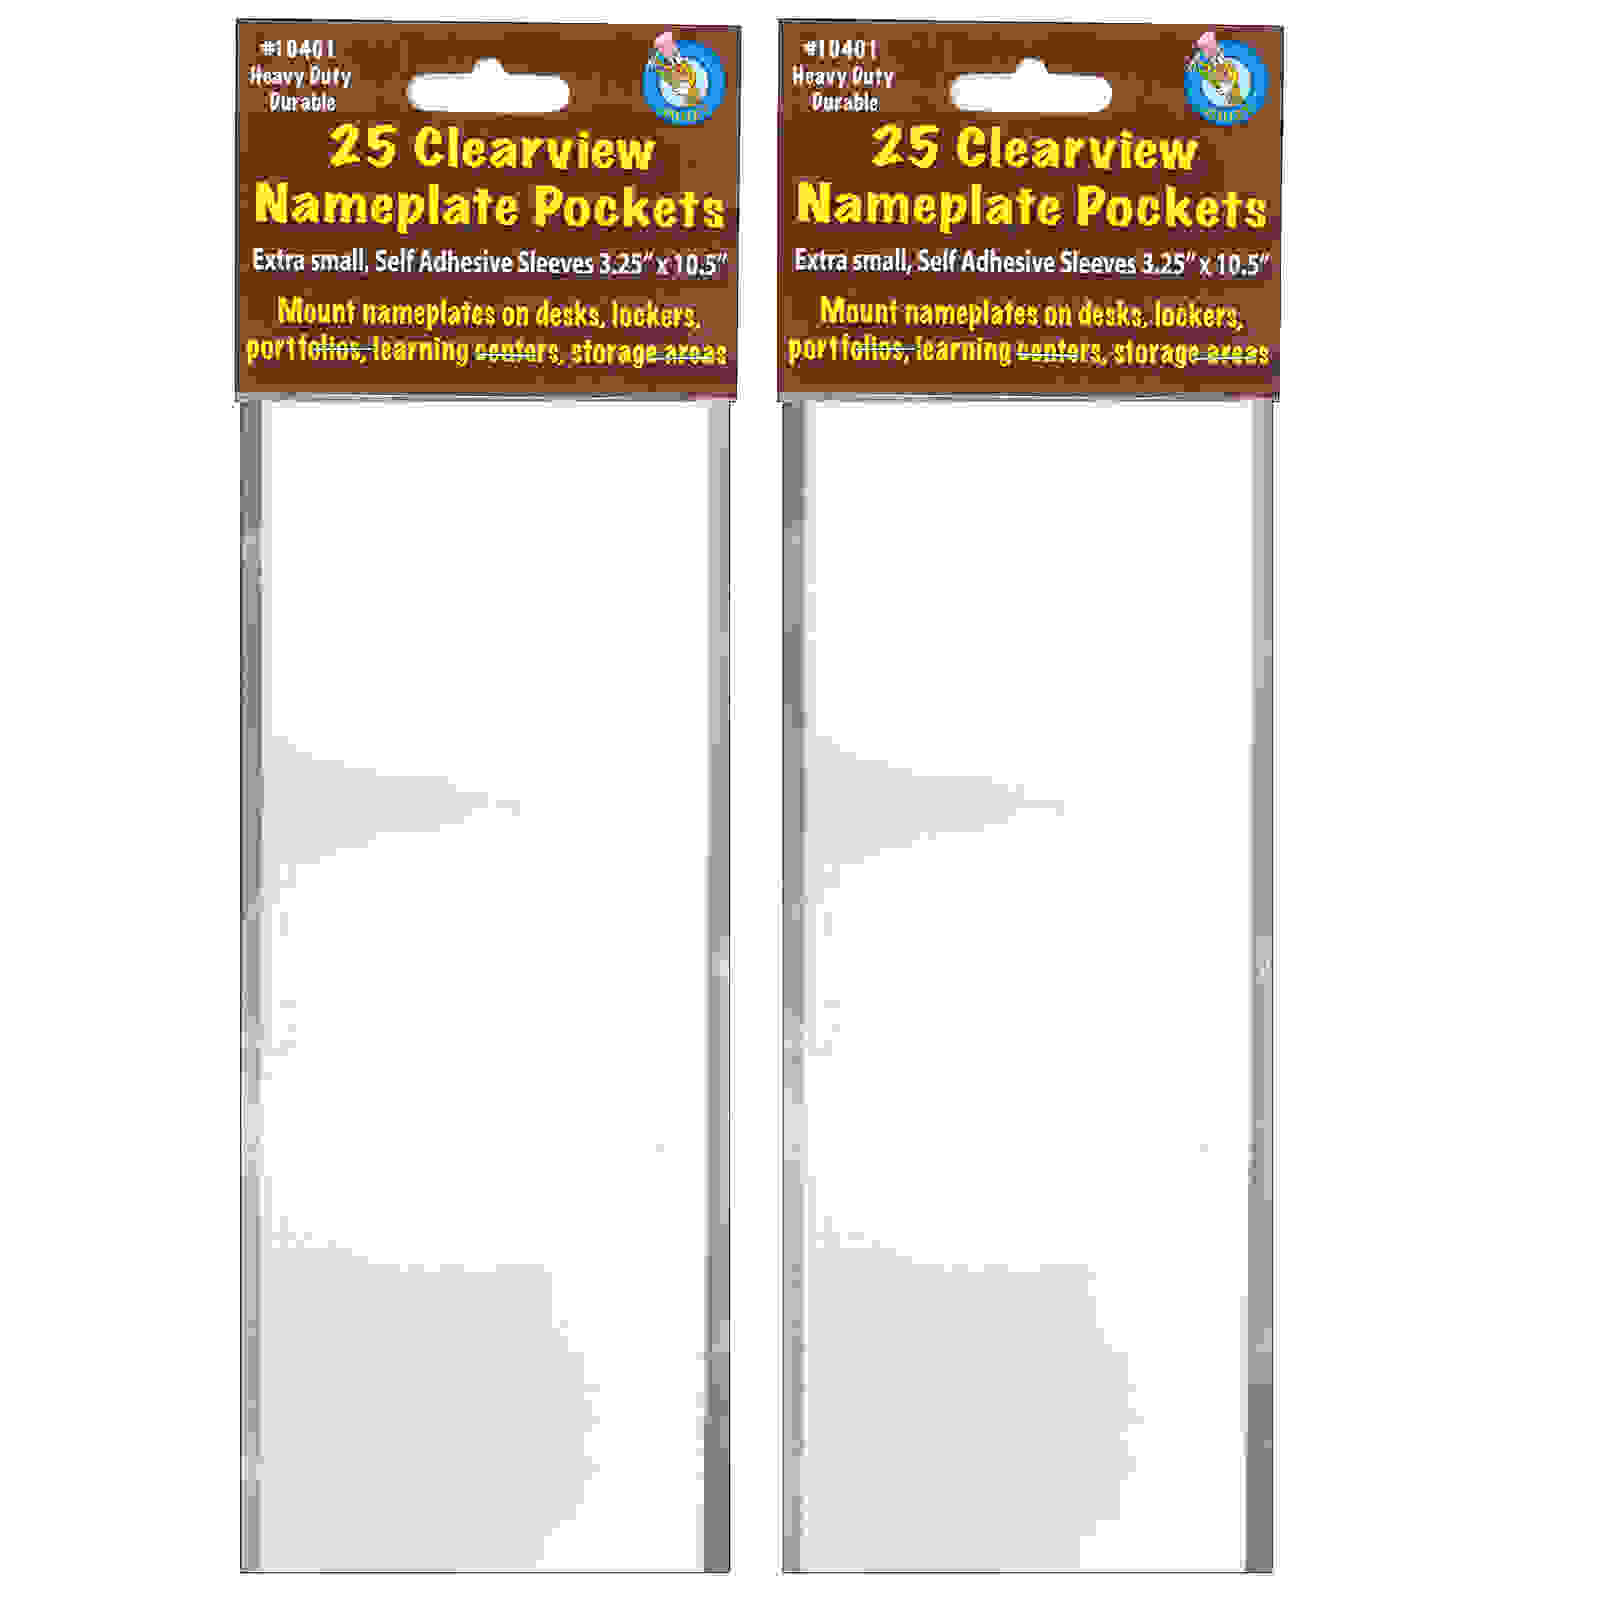 Clear View Self-Adhesive Extra Small Name Plate Pocket 3-1/4" x 10-1/2", 25 Per Pack, 2 Packs